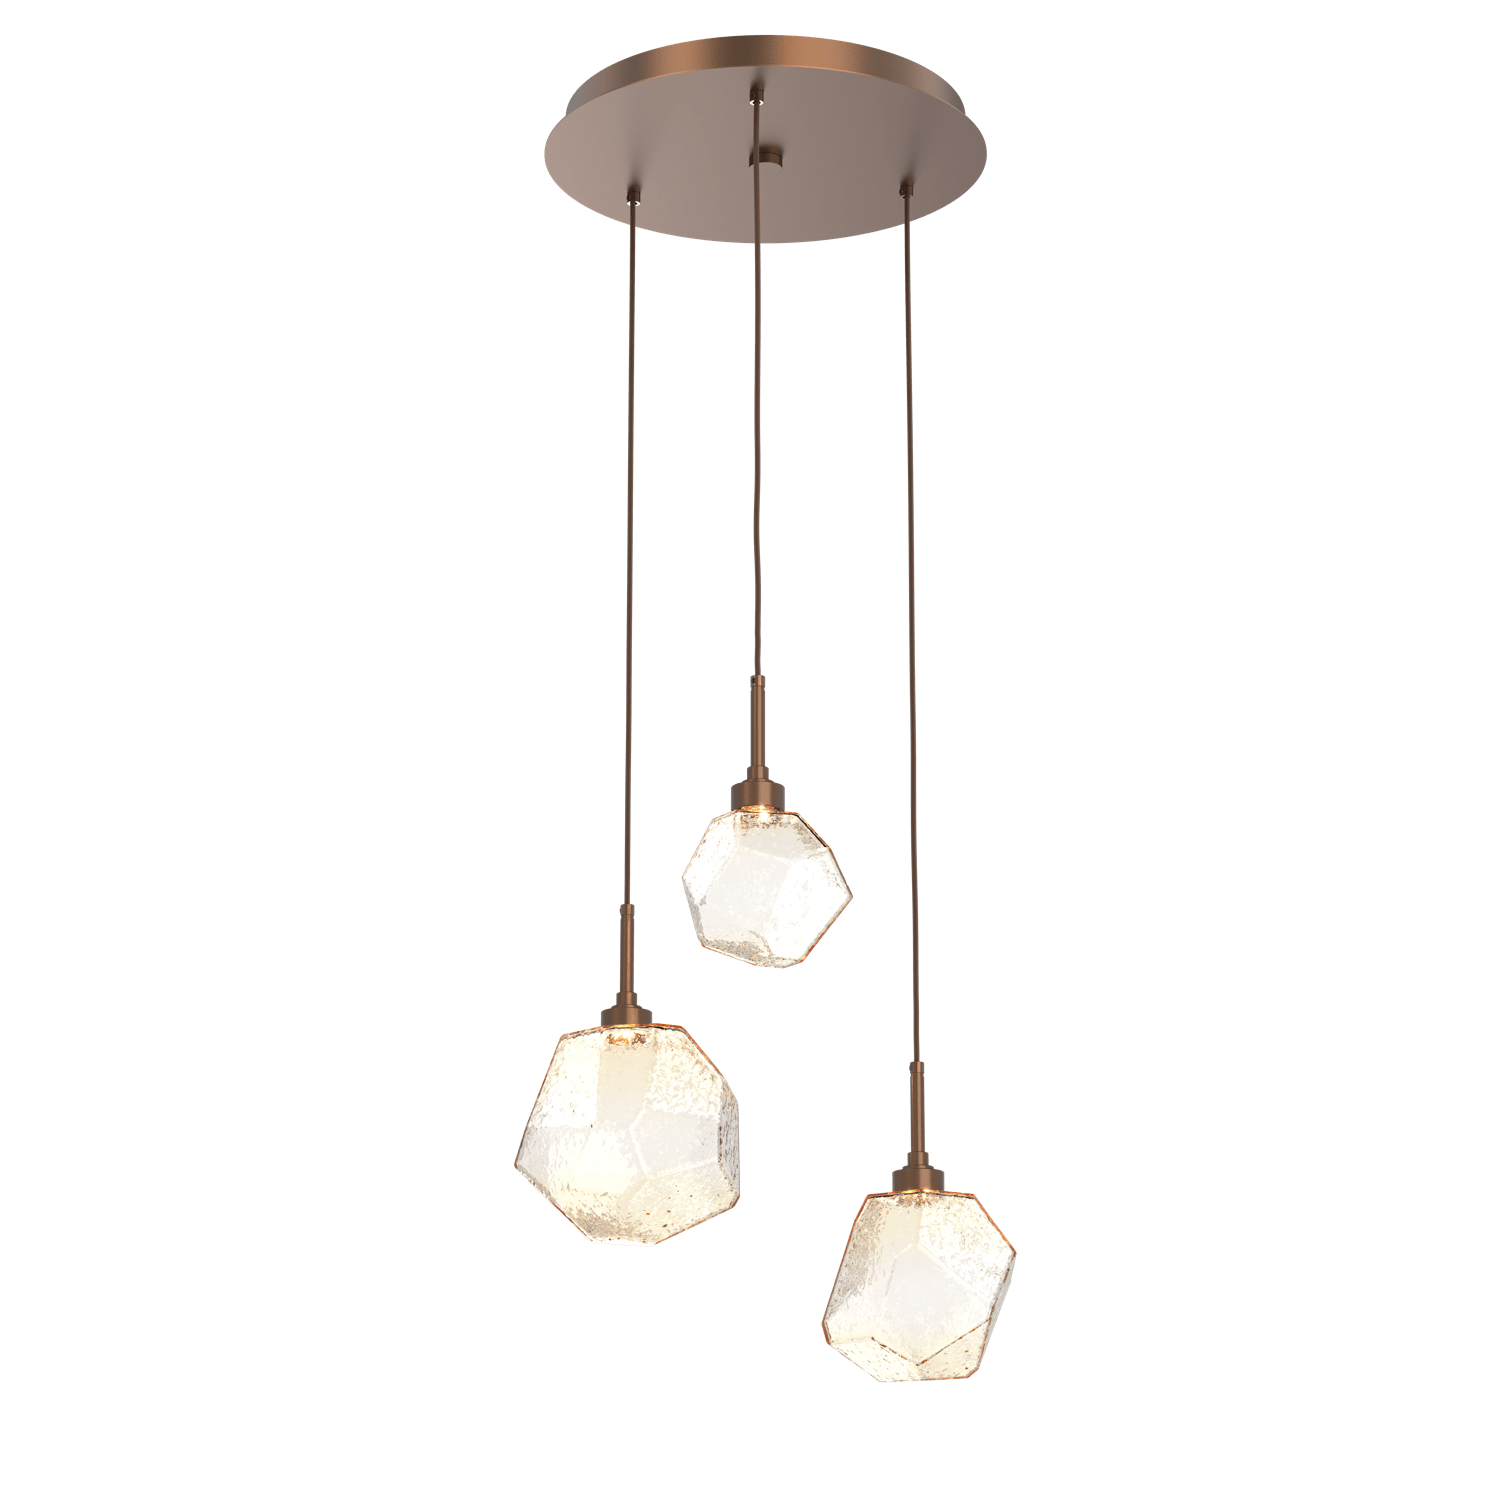 CHB0039-03-BB-A-Hammerton-Studio-Gem-3-light-round-pendant-chandelier-with-burnished-bronze-finish-and-amber-blown-glass-shades-and-LED-lamping